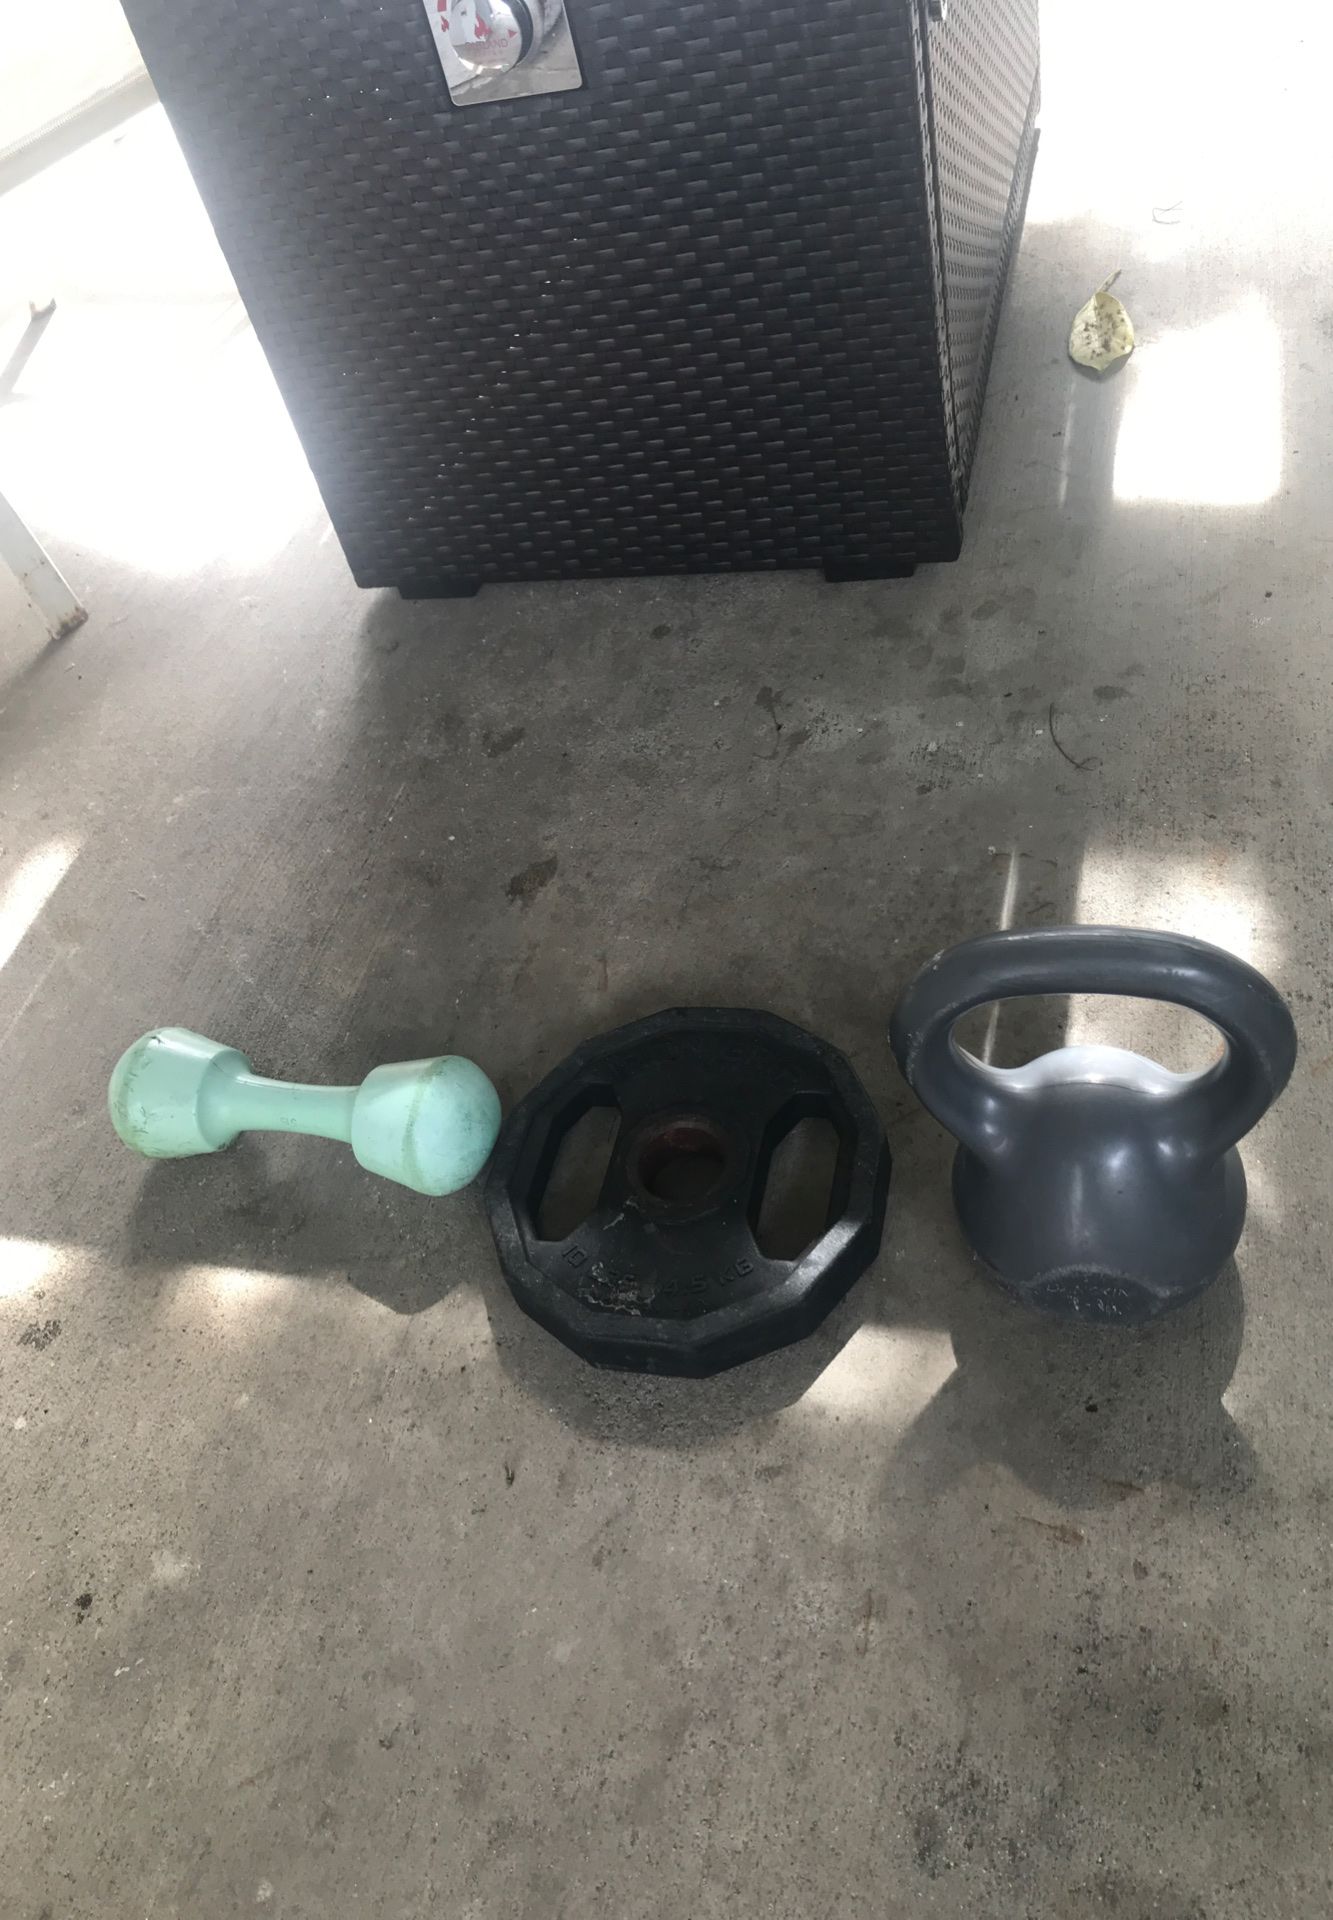 Kettle ball (10 lbs) , dumbbell (5 lbs), free weight (10 lbs)